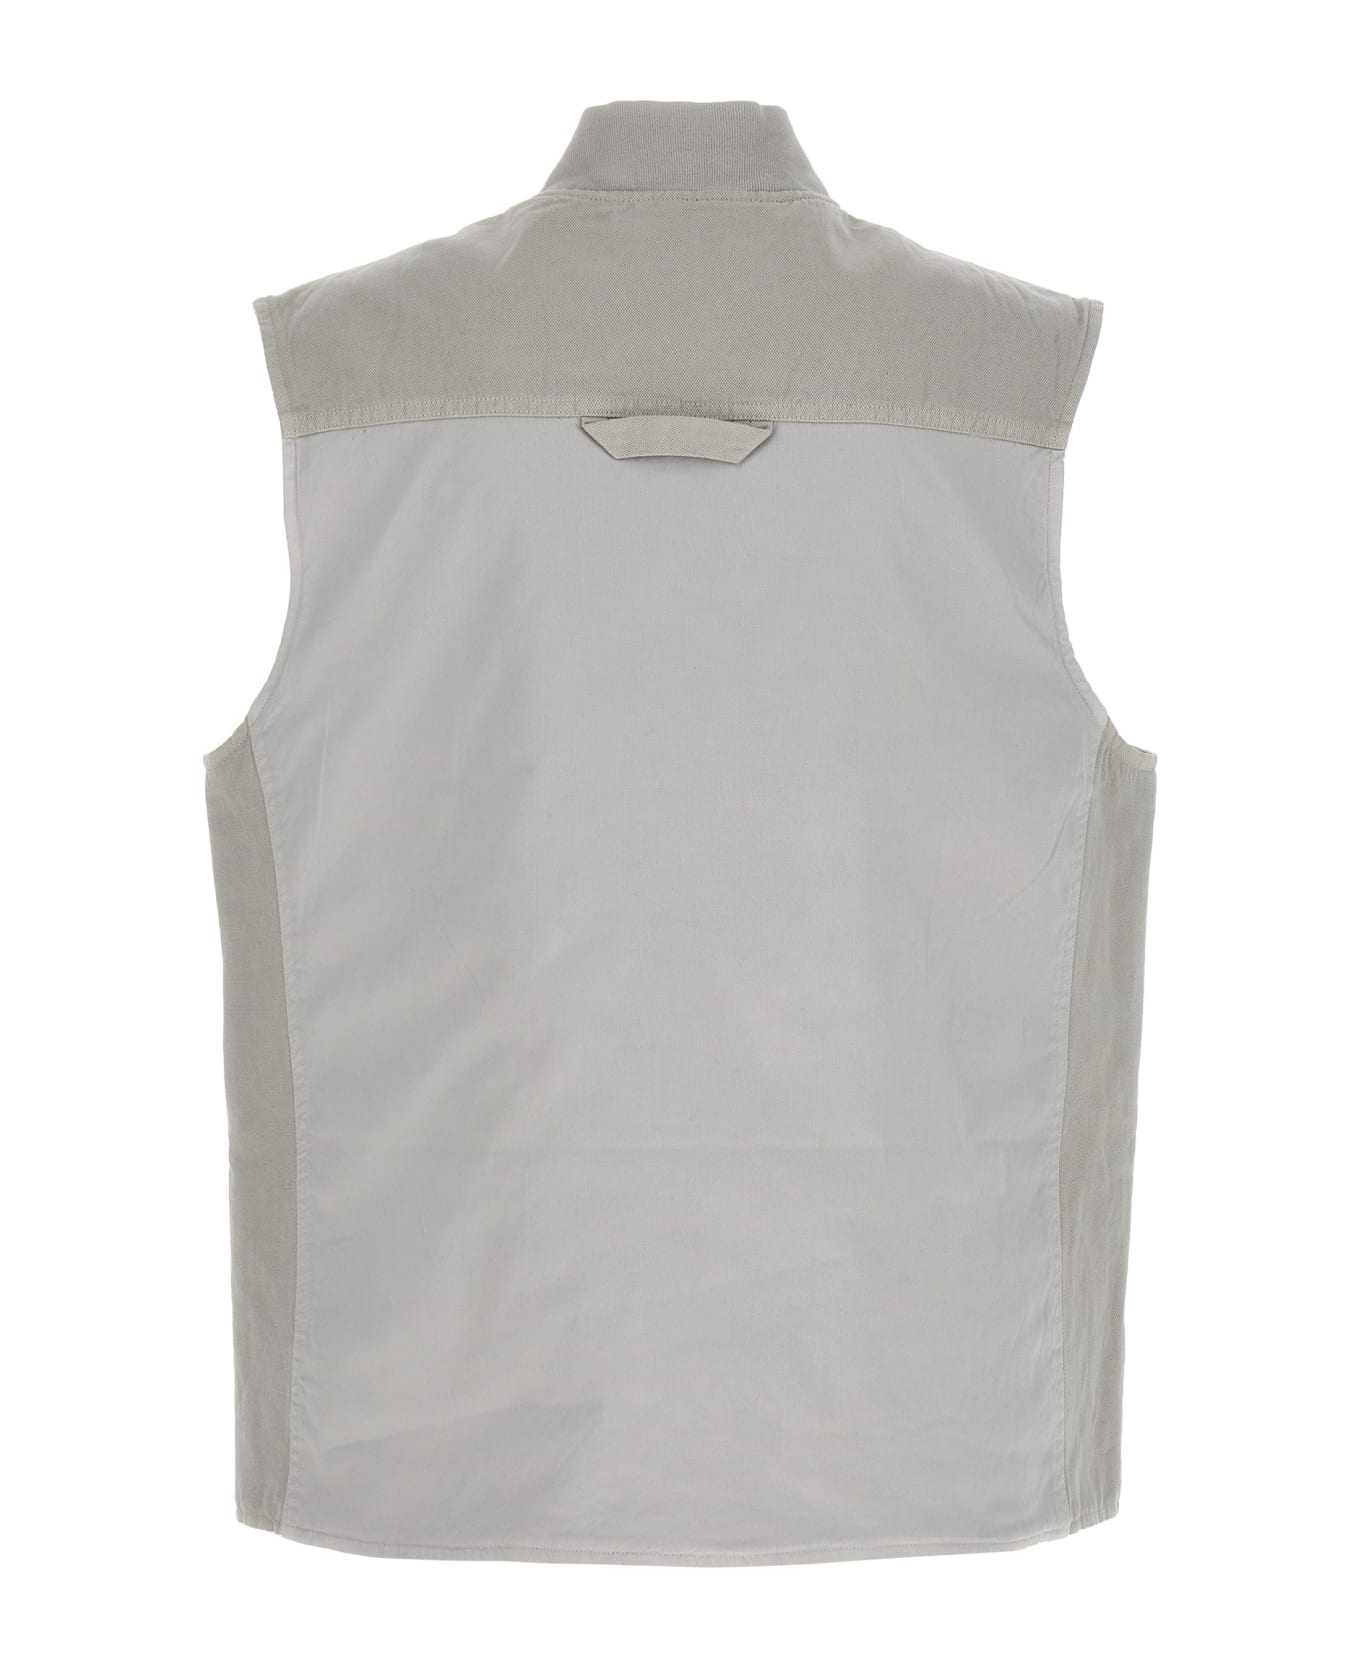 Objects Iv Life Canvas Vest - GREY ベスト